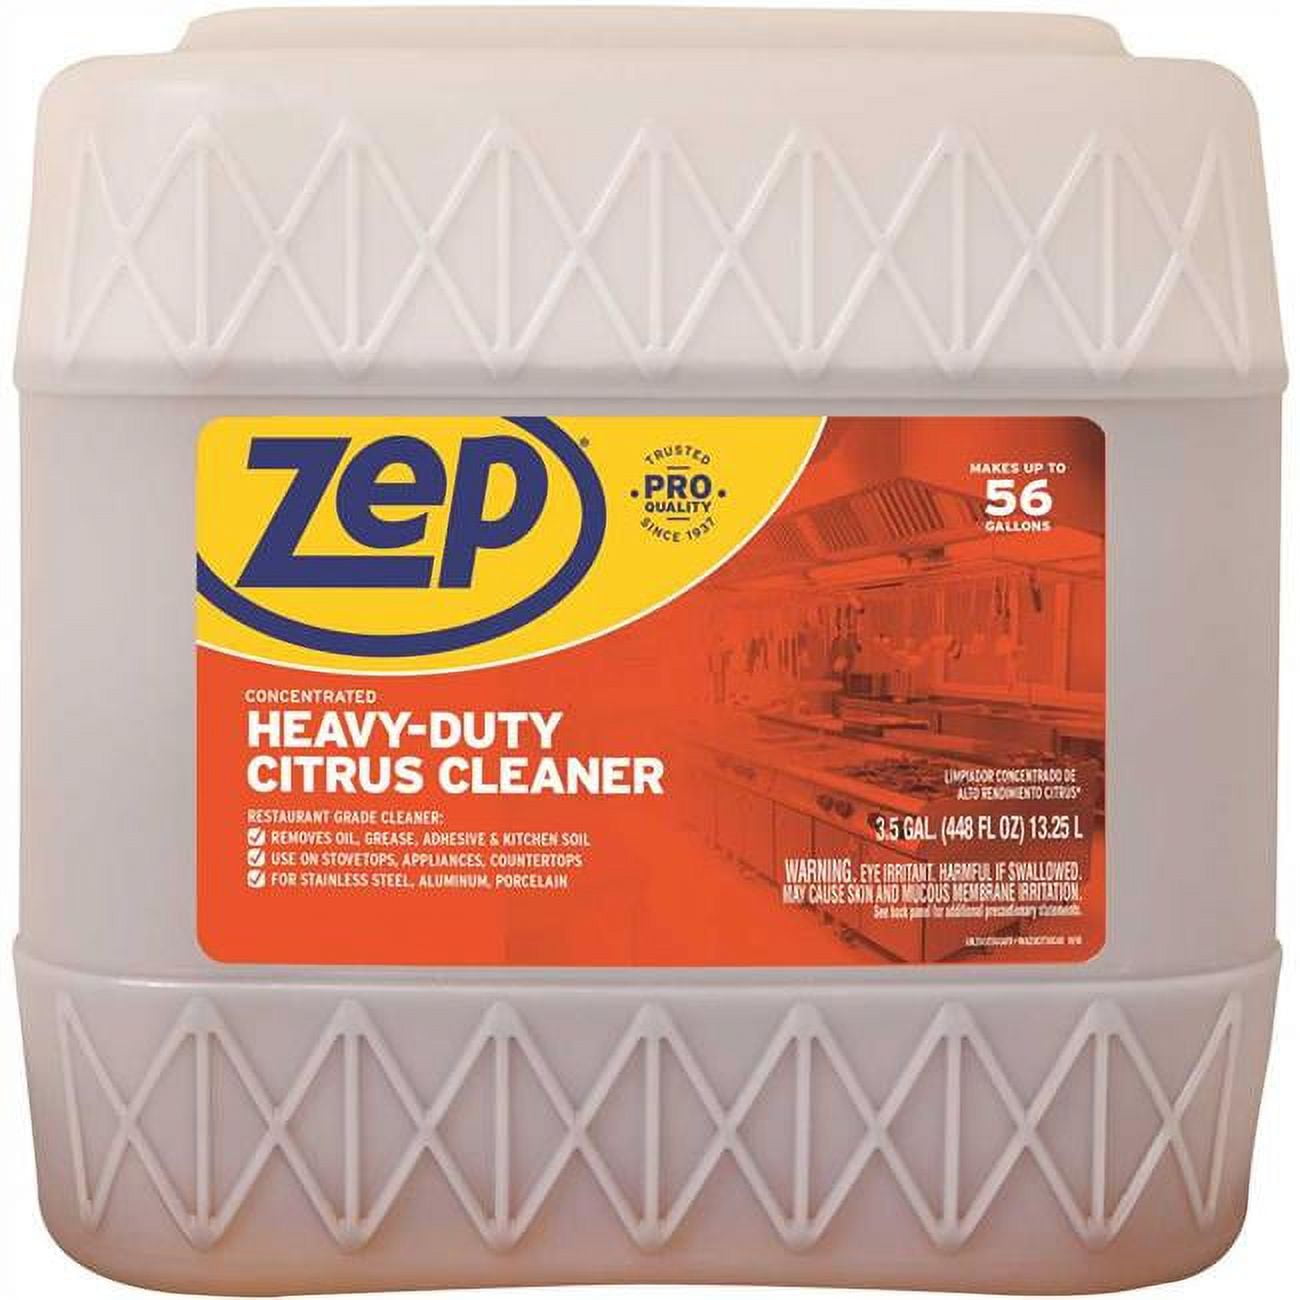 Zep Oven Brite Ready-to-Use Oven Cleaner, 5 Gallon Pail